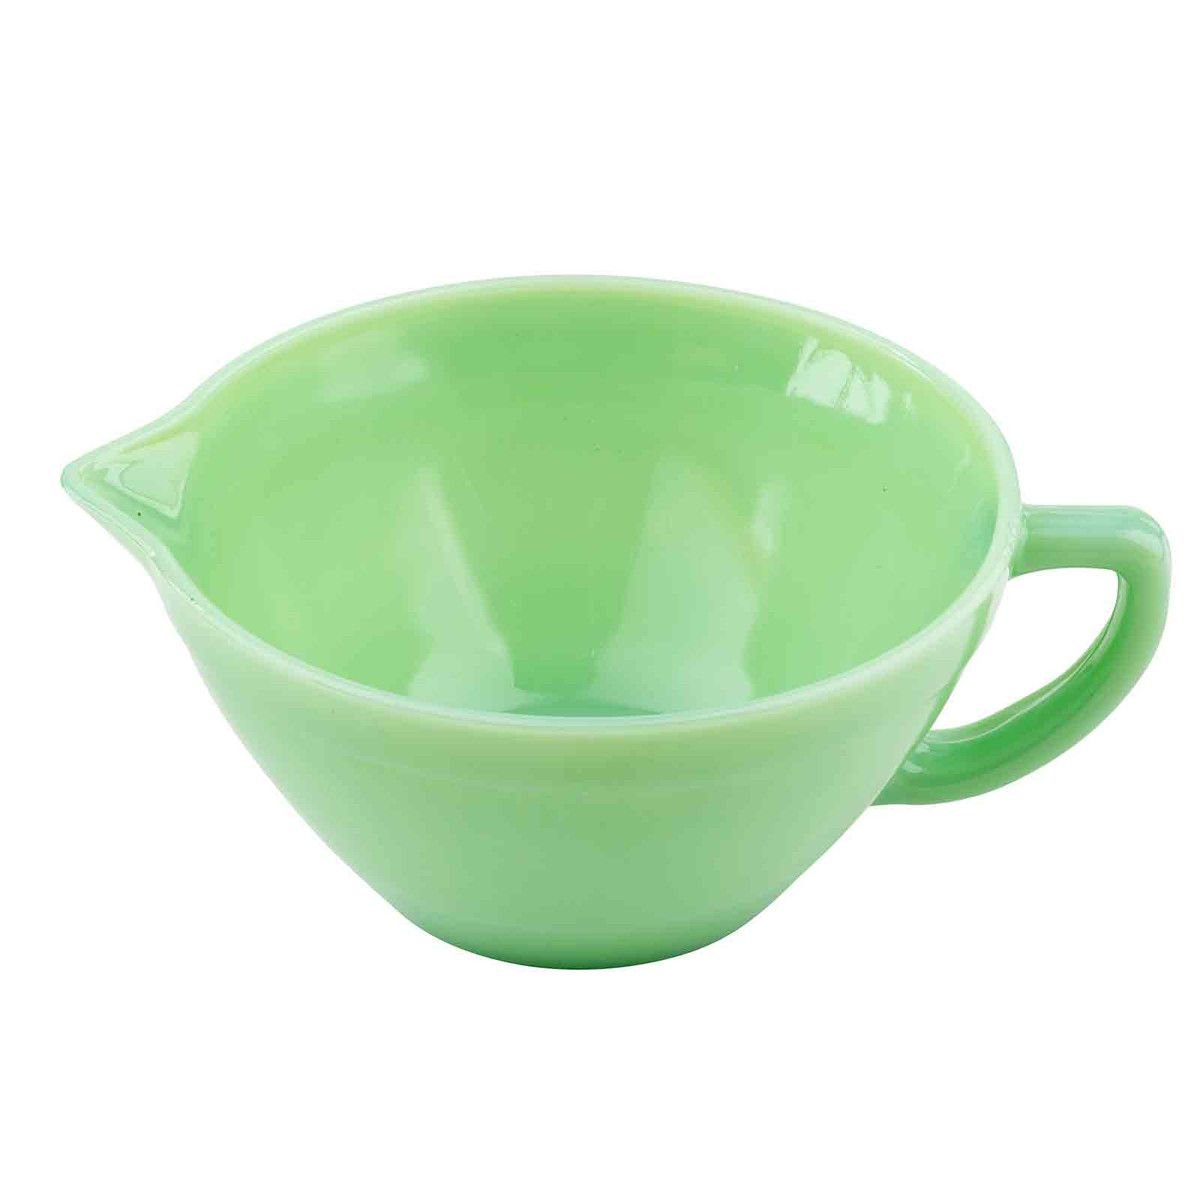 Shop the Mosser Glass 3 Piece Mixing Bowl Set Jadeite at Weston Table